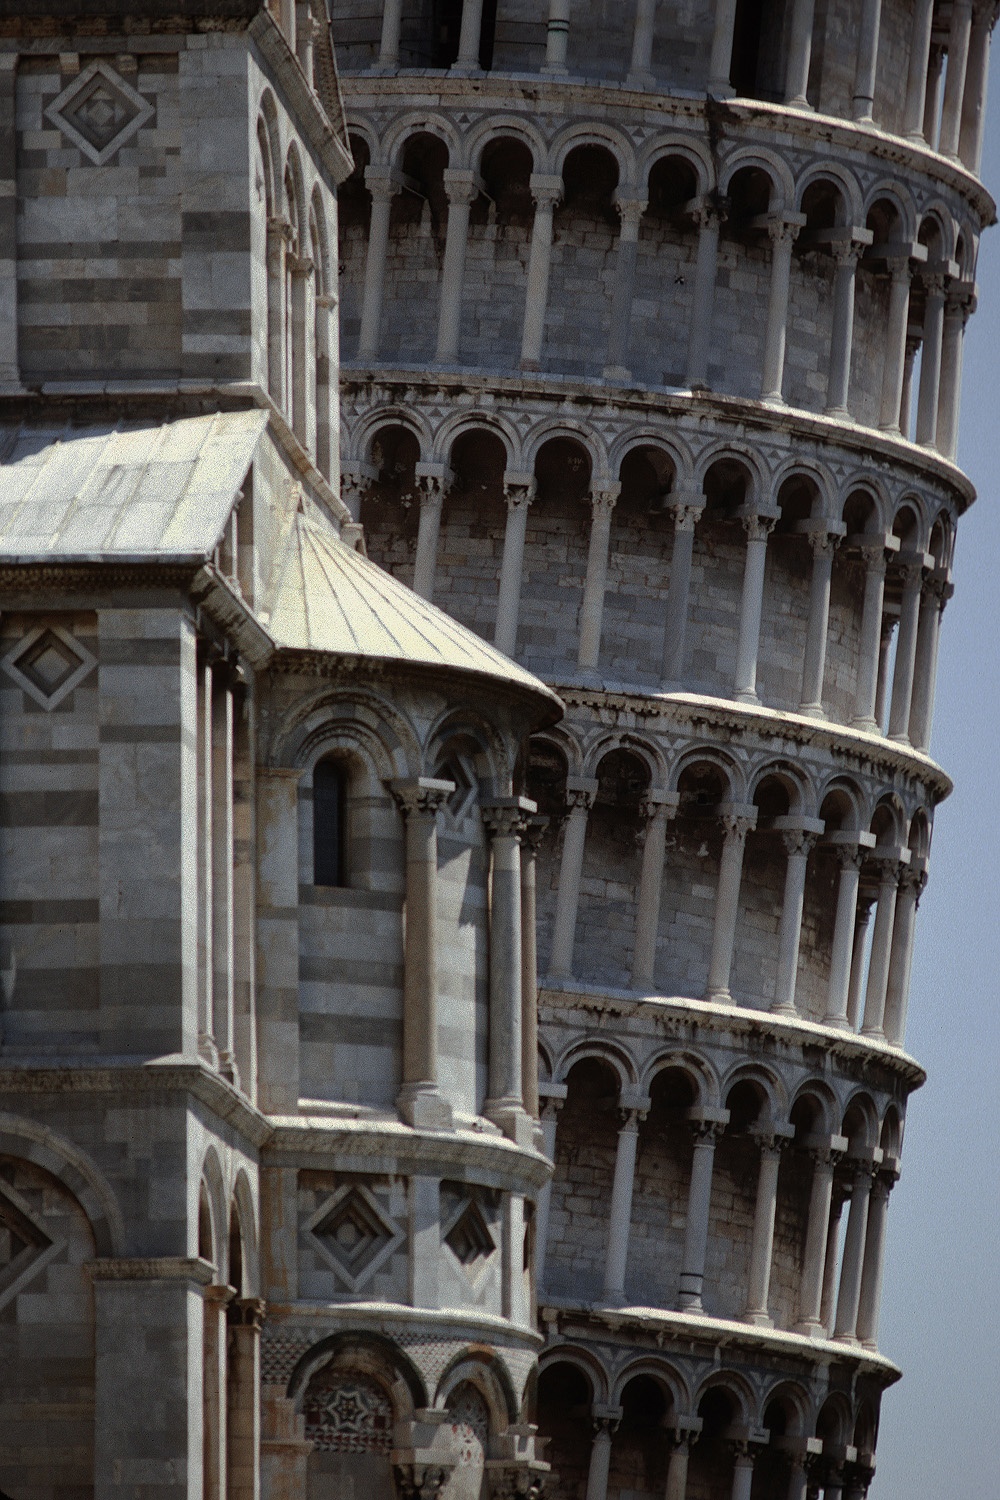 bill-hocker-cathedral-and-tower-pisa-italy-1991